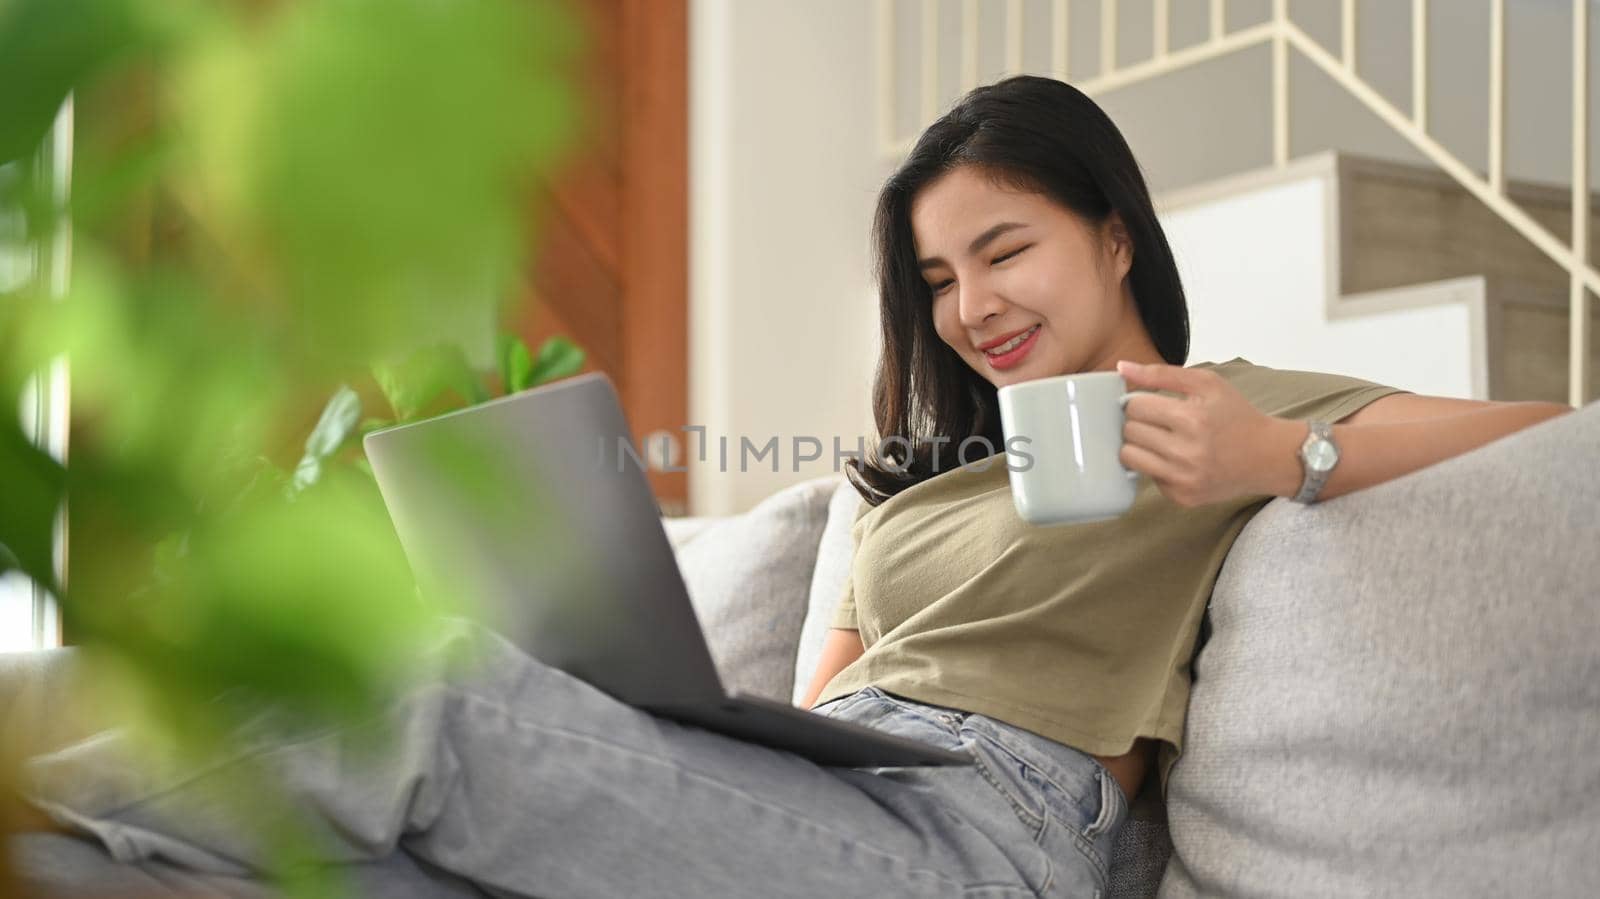 Joyful young woman browsing internet, chatting with friends on laptop computer.